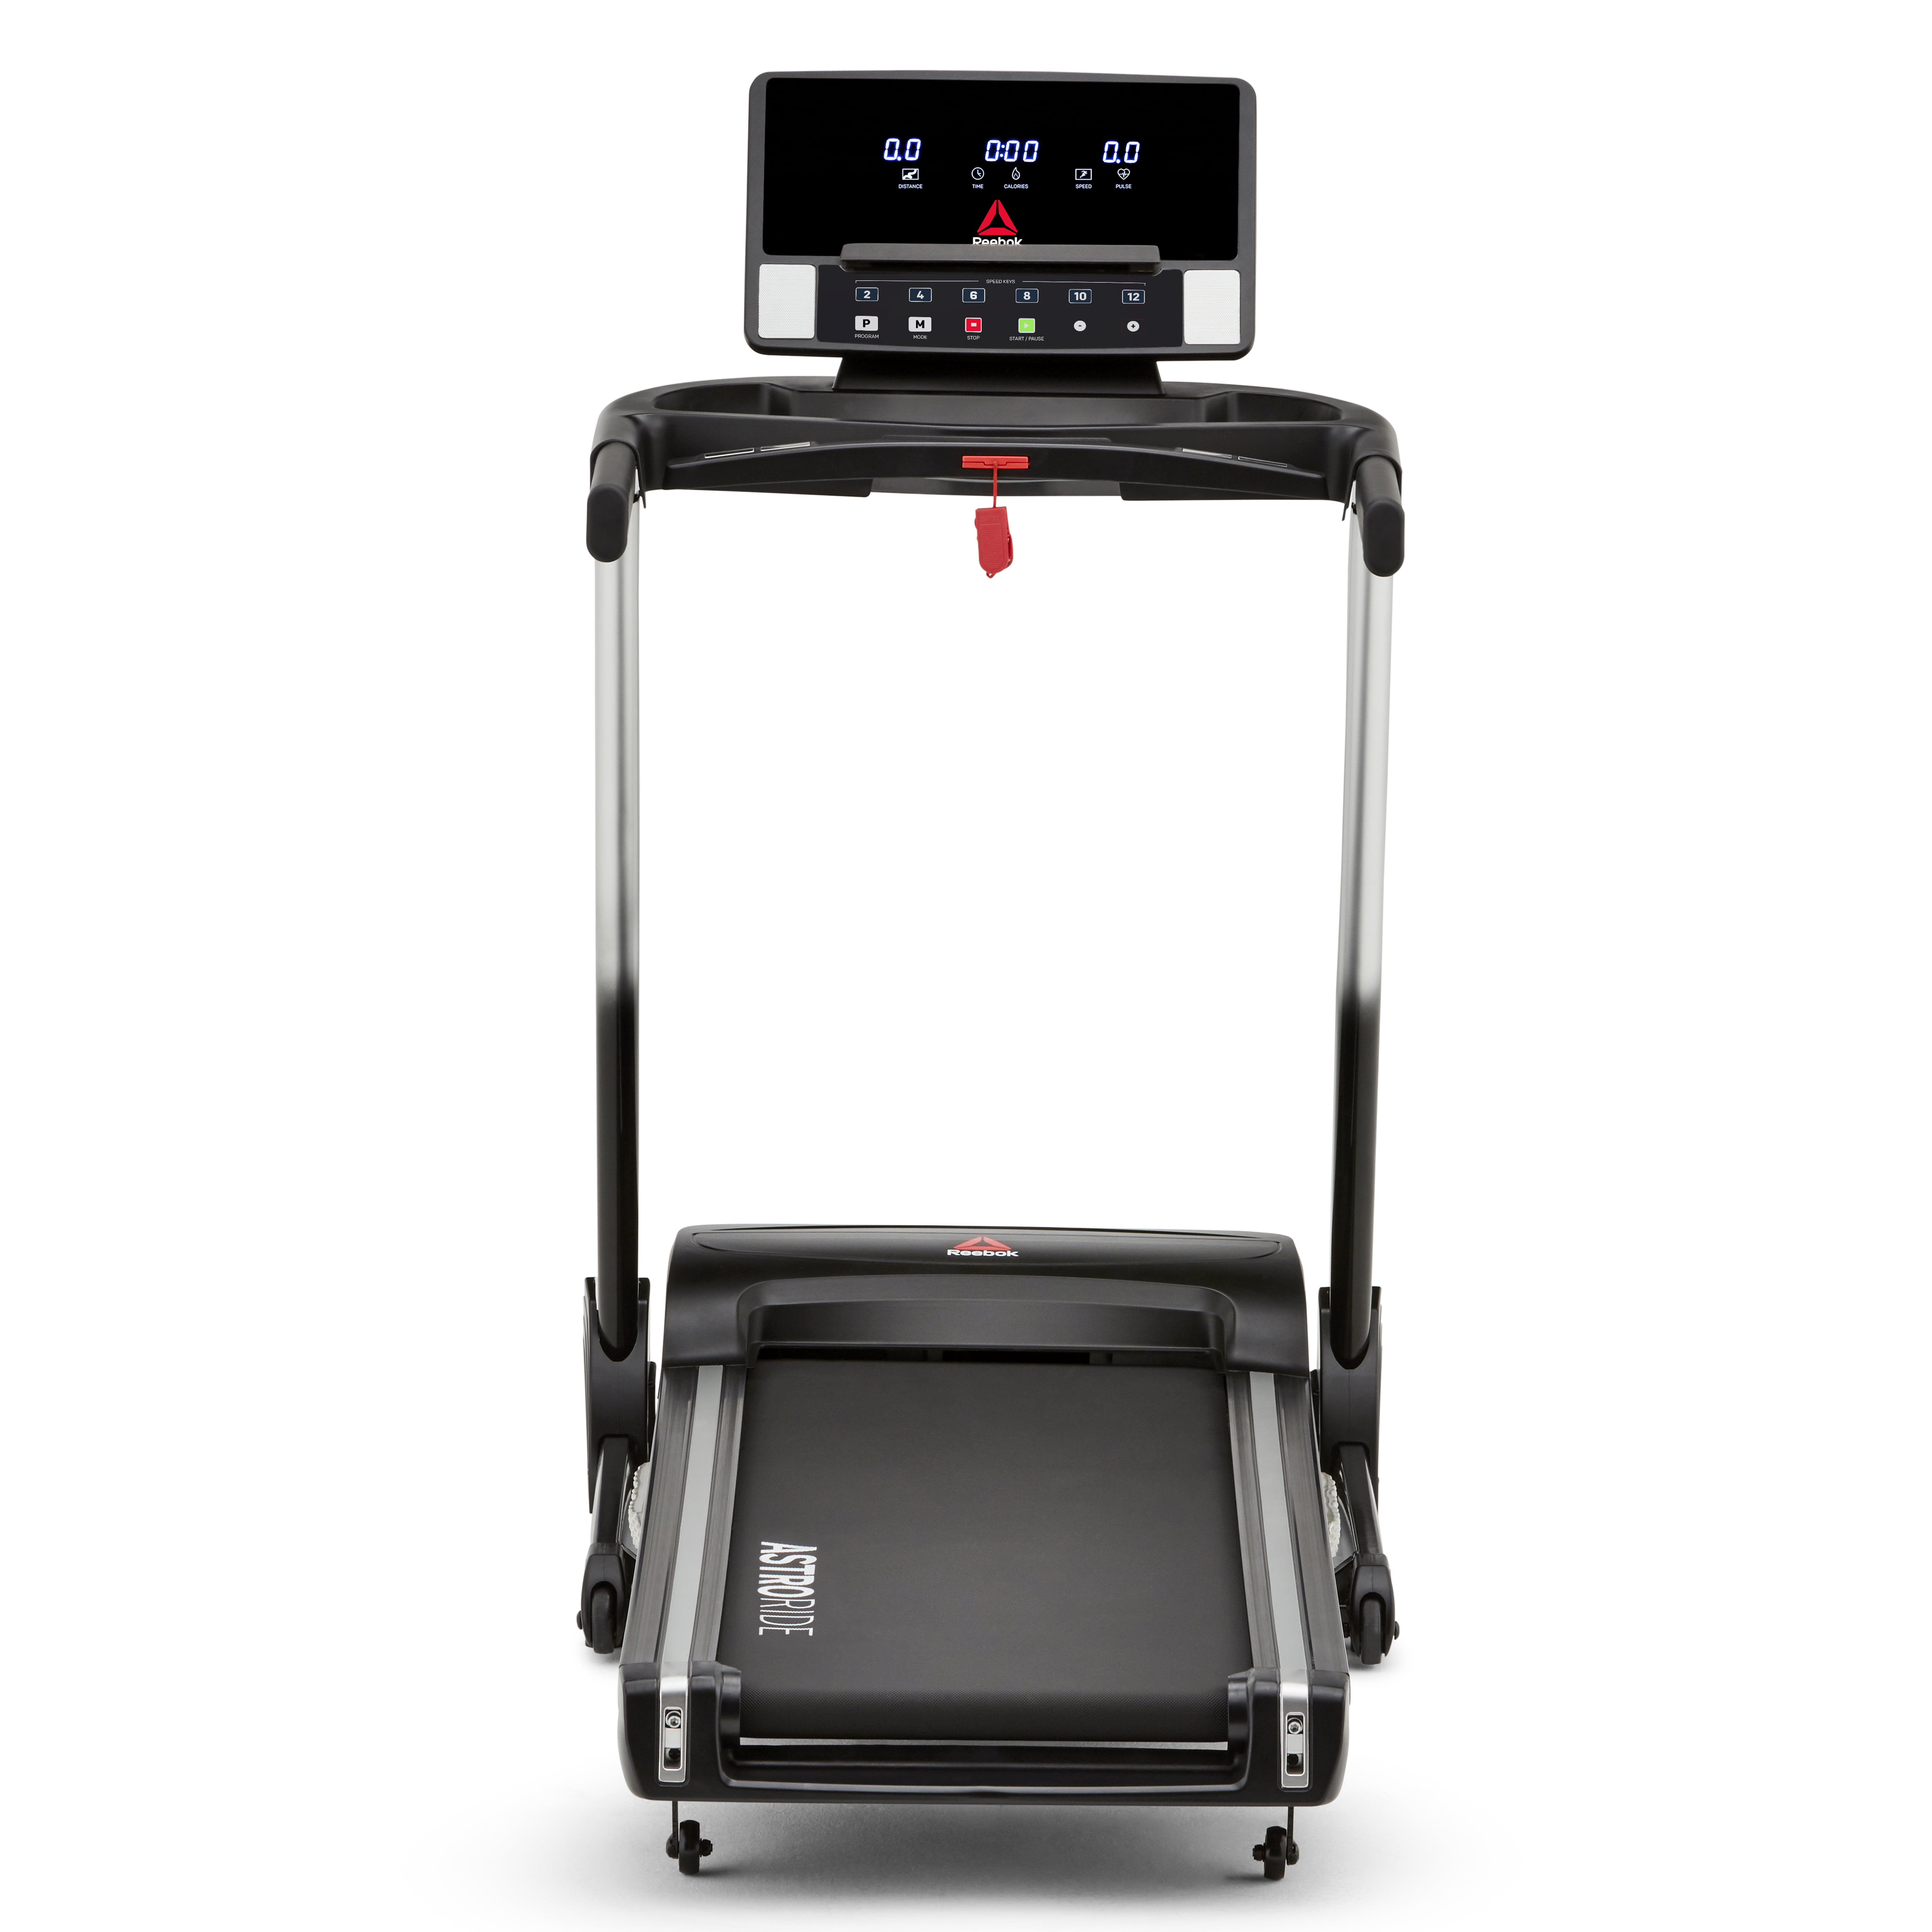 Reebok Astroride Workout Exercise Running Treadmill with LED Display - Walmart.com